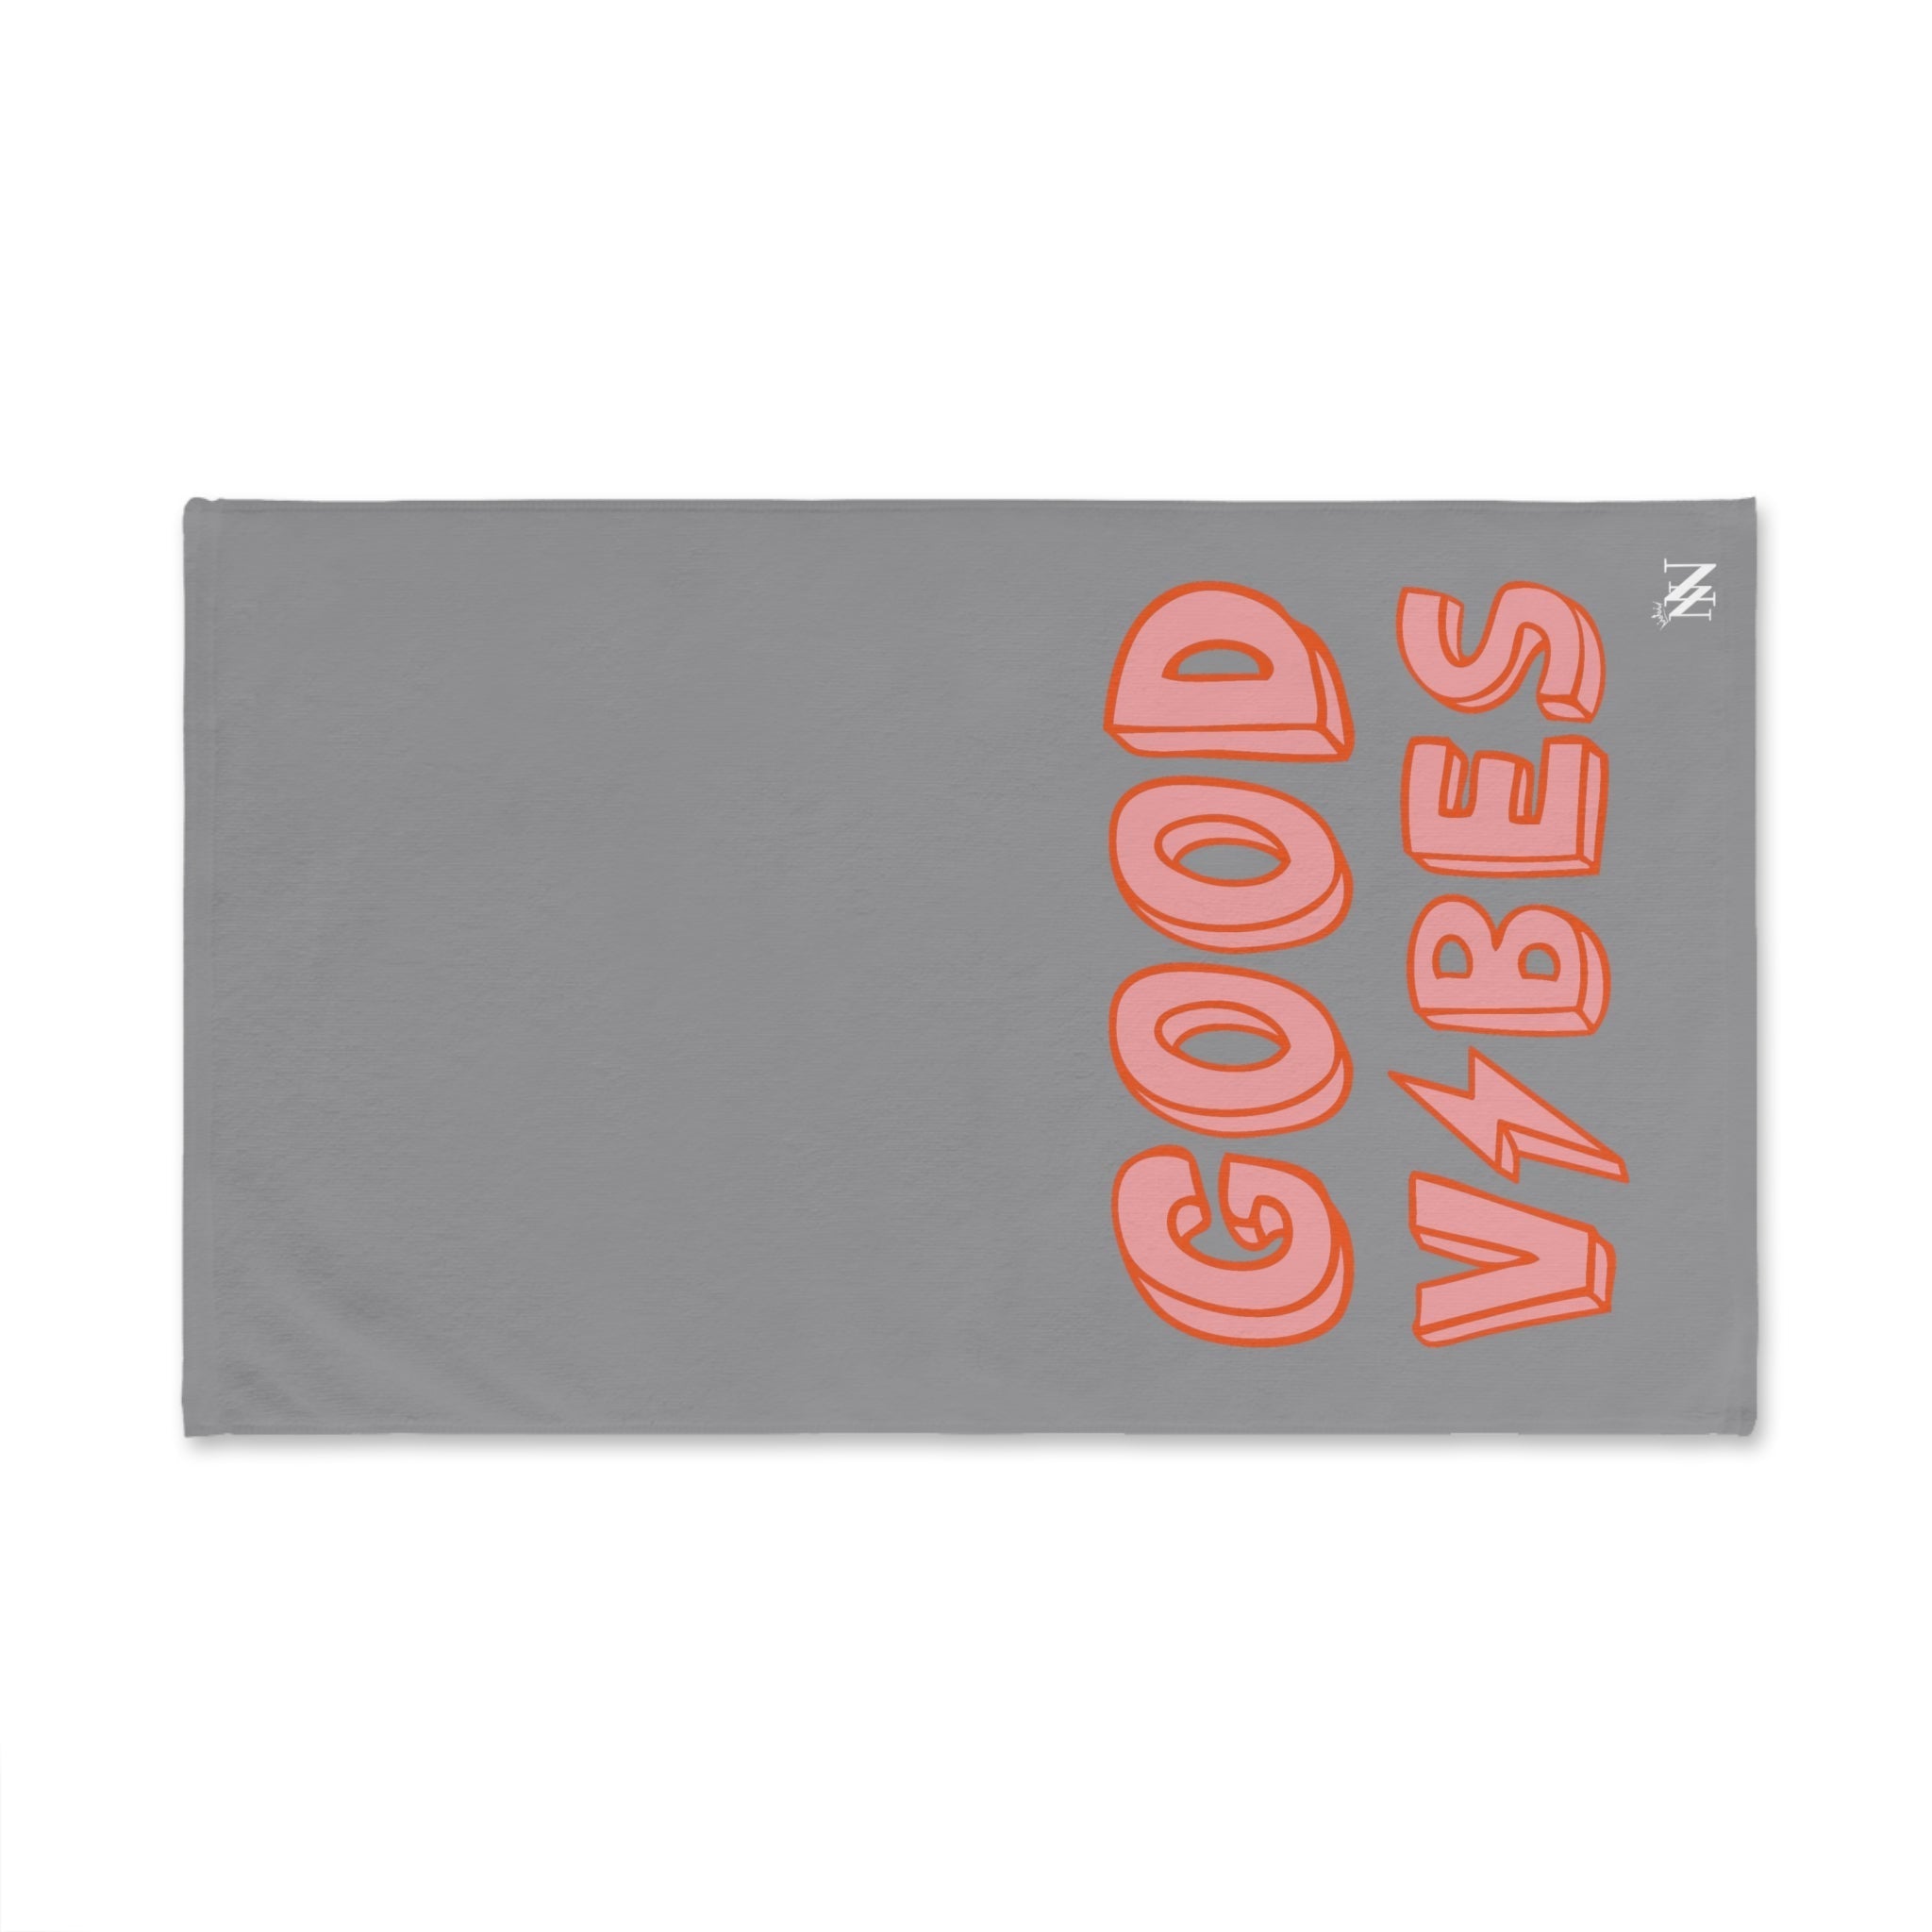 Electric Vibe Good Grey | Anniversary Wedding, Christmas, Valentines Day, Birthday Gifts for Him, Her, Romantic Gifts for Wife, Girlfriend, Couples Gifts for Boyfriend, Husband NECTAR NAPKINS